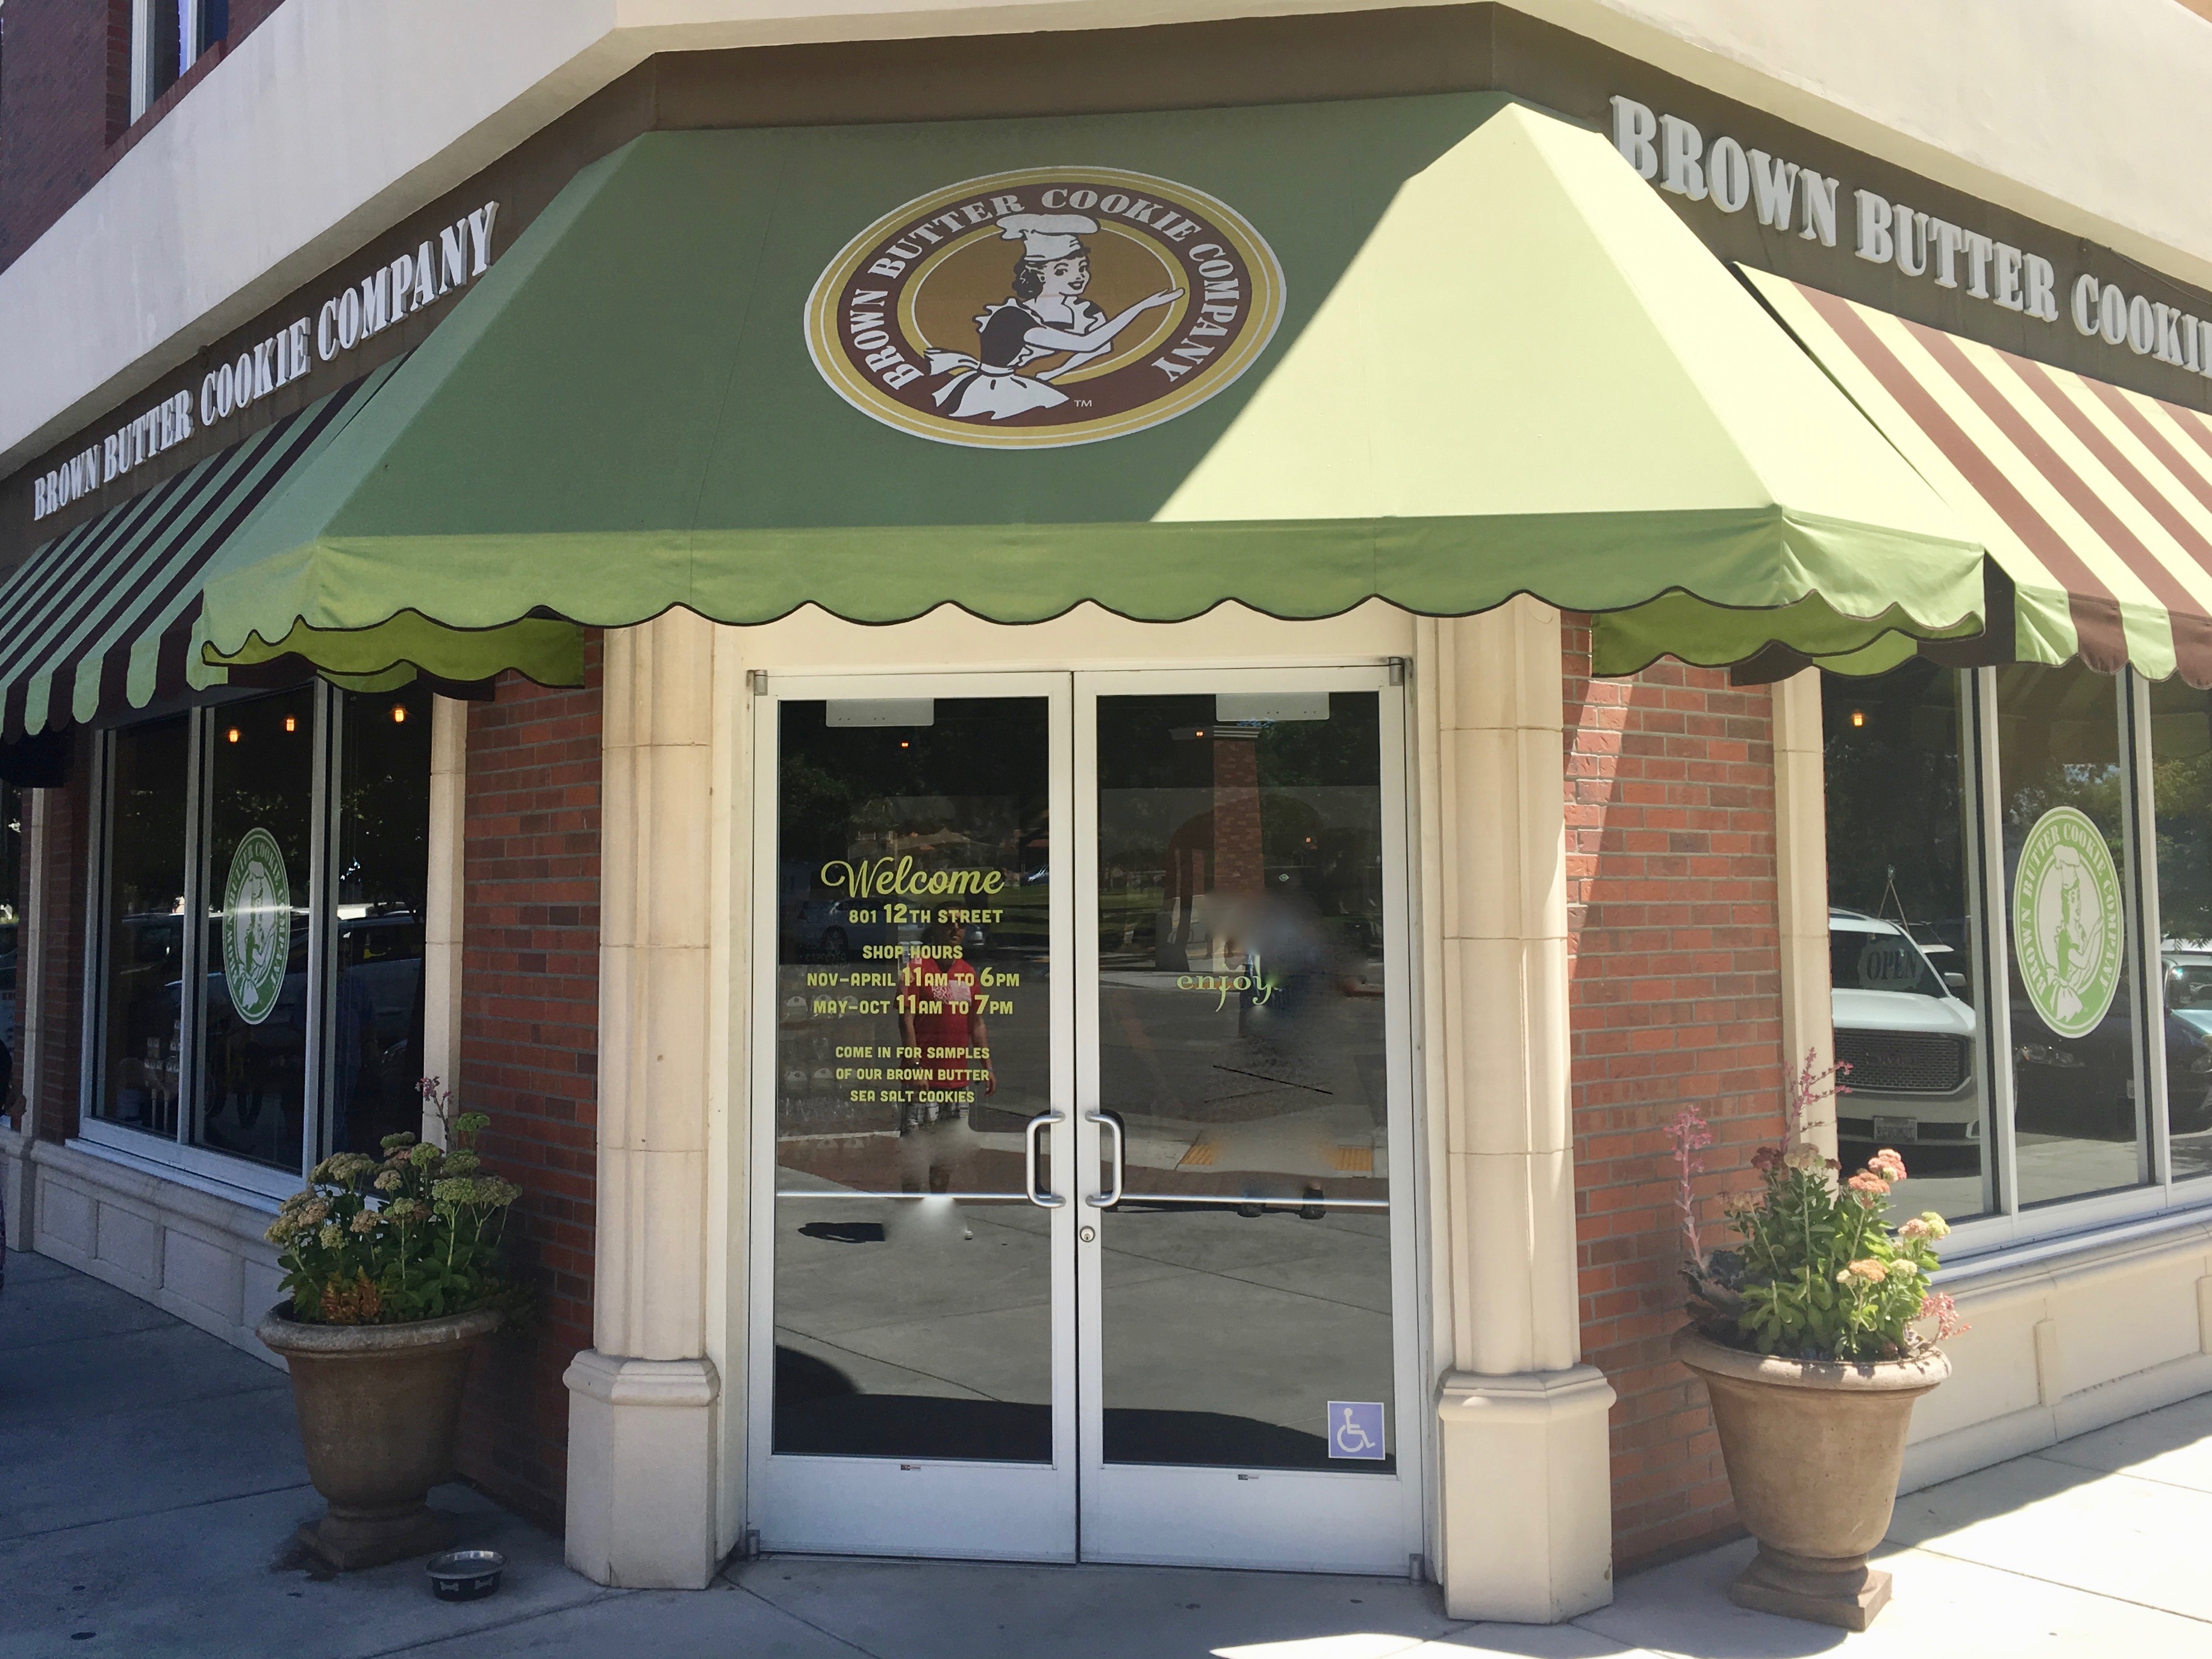 Brown Butter Cookie Company store in downtown Paso Robles, California.